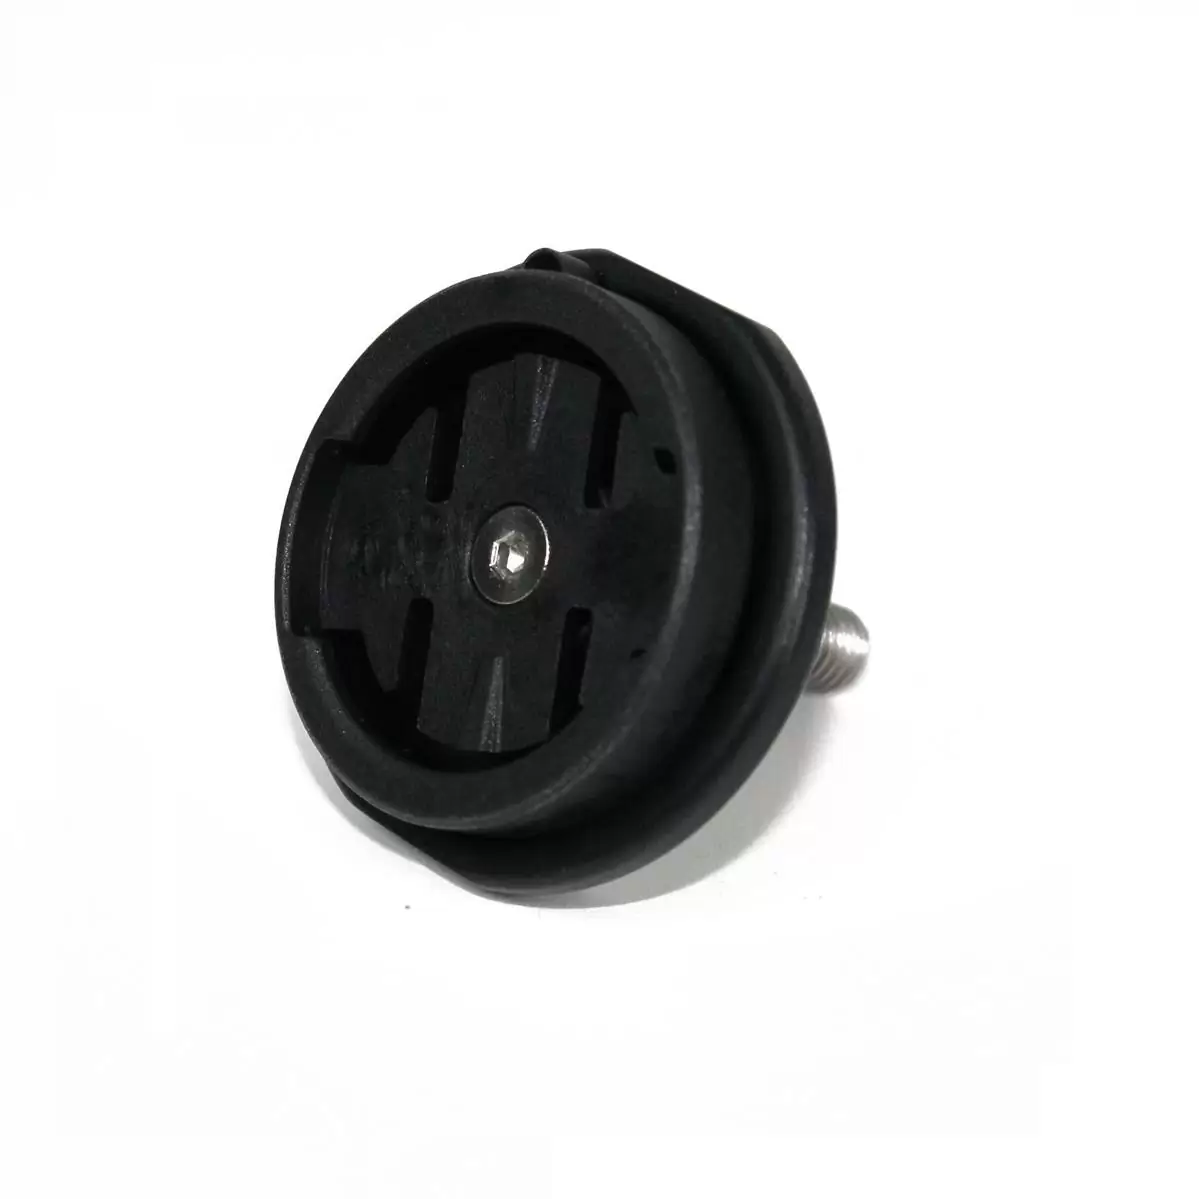 Ahead steering cap with Garmin connection - image